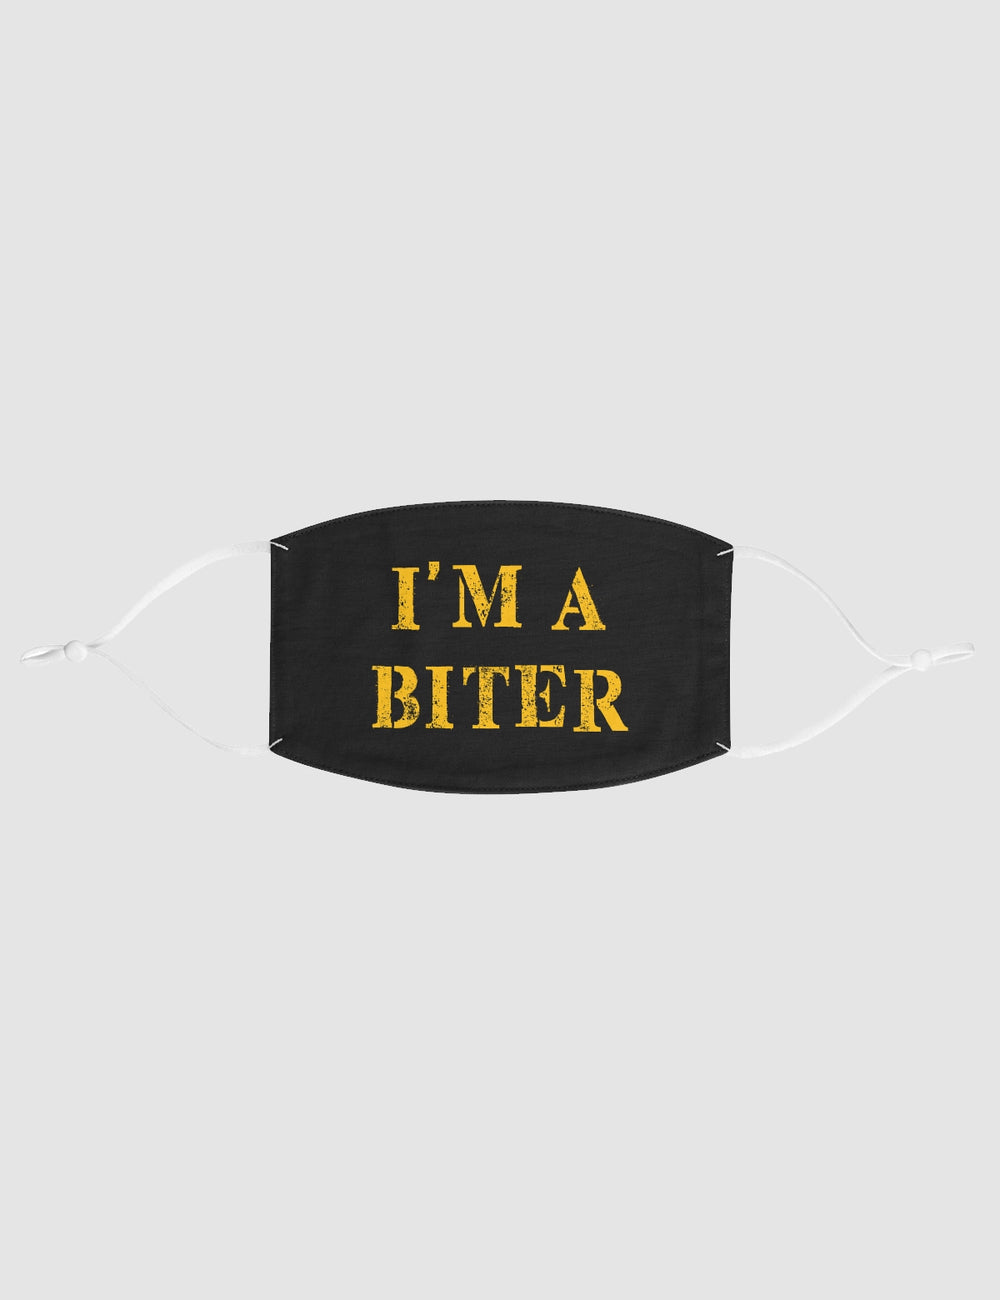 I'm A Biter | Two-Layer Polyester Fabric Face Mask OniTakai